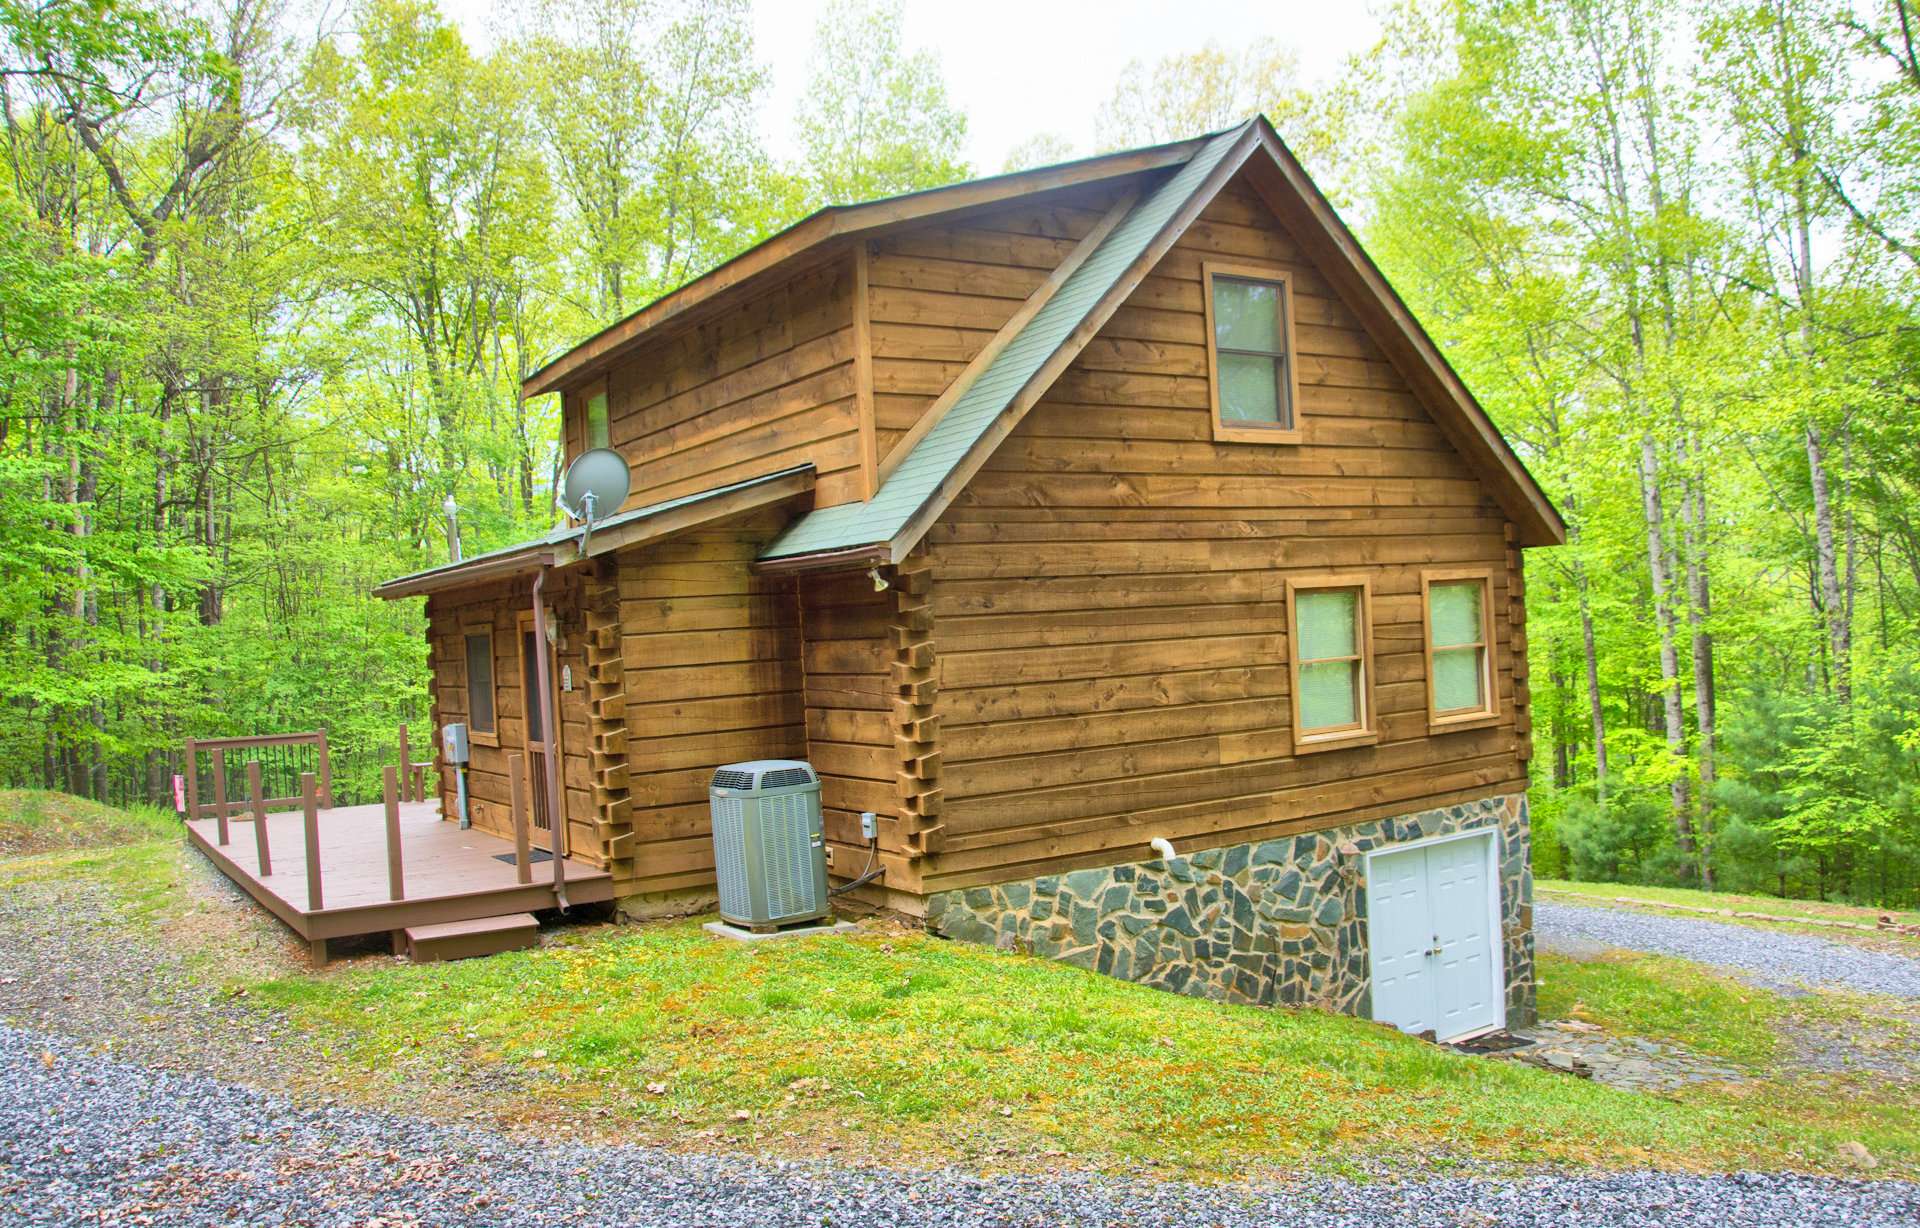 This sweet cabin was built by the sellers in 2002 to provide an escape from the hustle and bustle of city life.  It has been well loved and well maintained. It is time now for someone new to enjoy this cozy mountain retreat.   Call today for more information or an appointment to view this charming log cabin nestled in the North Carolina Mountains.